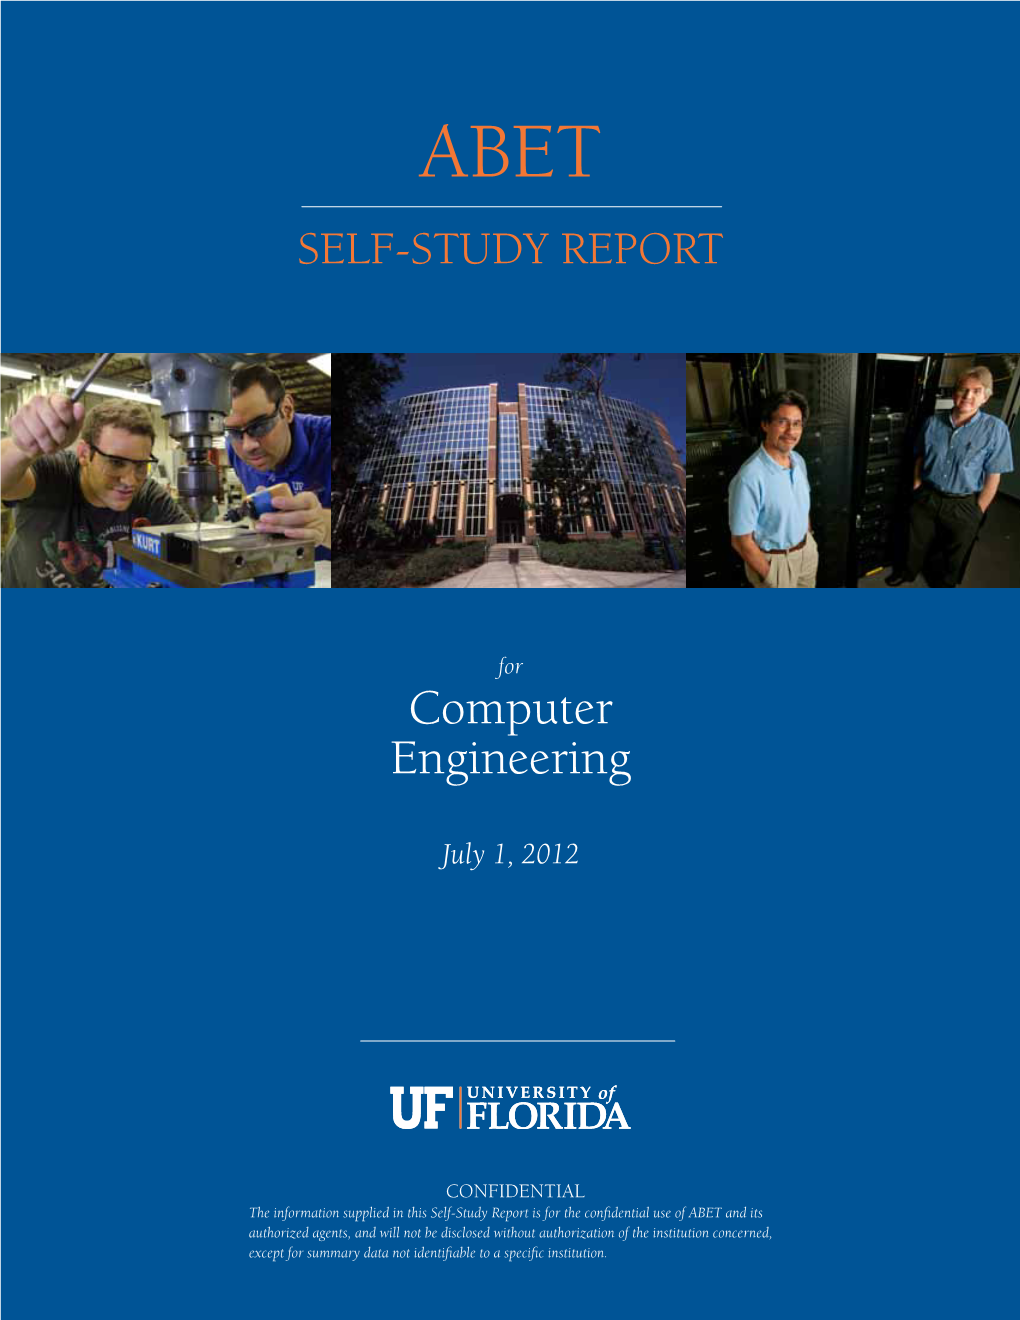 2011-2012 ABET Self-Study Questionnaire for Engineering